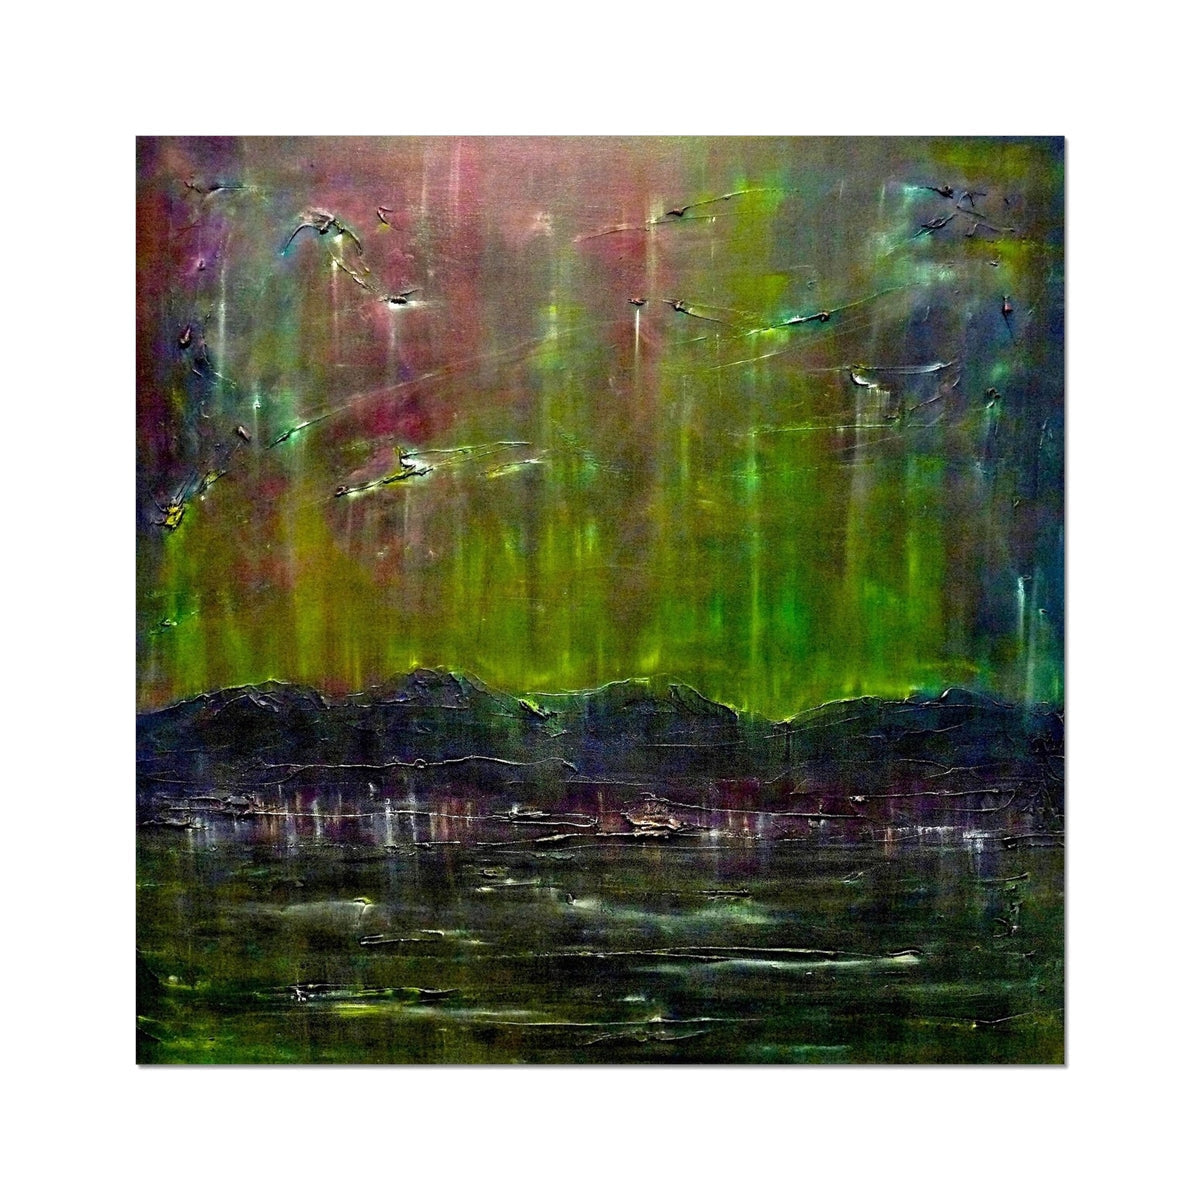 Cromarty Harbour Northern Lights Painting | Fine Art Prints From Scotland-Unframed Prints-Scottish Highlands & Lowlands Art Gallery-24"x24"-Paintings, Prints, Homeware, Art Gifts From Scotland By Scottish Artist Kevin Hunter